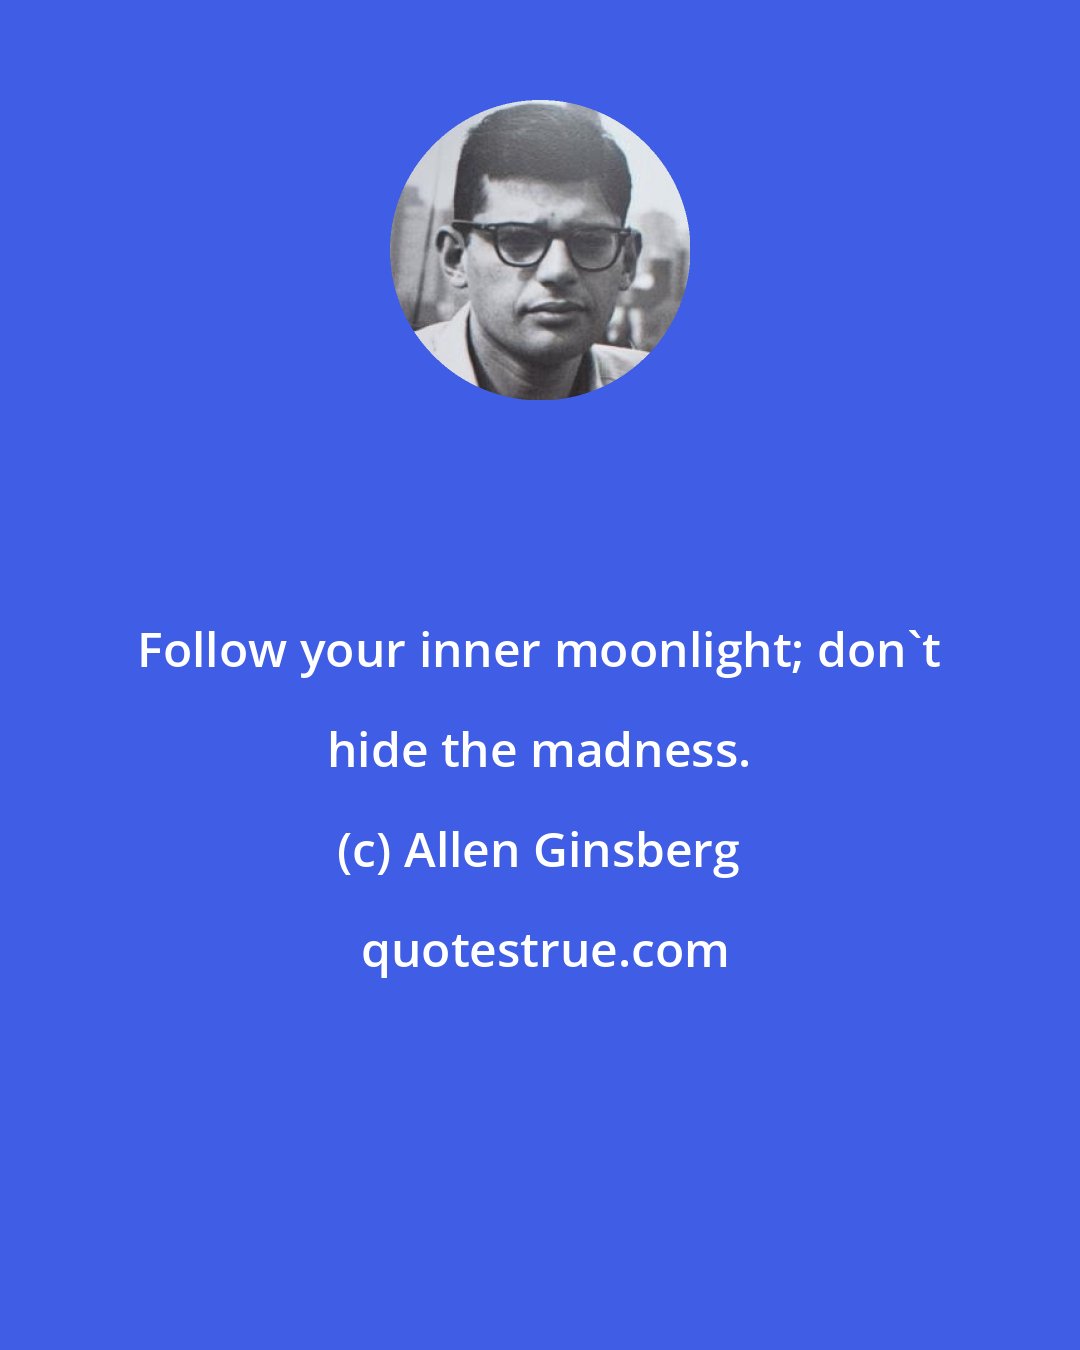 Allen Ginsberg: Follow your inner moonlight; don't hide the madness.